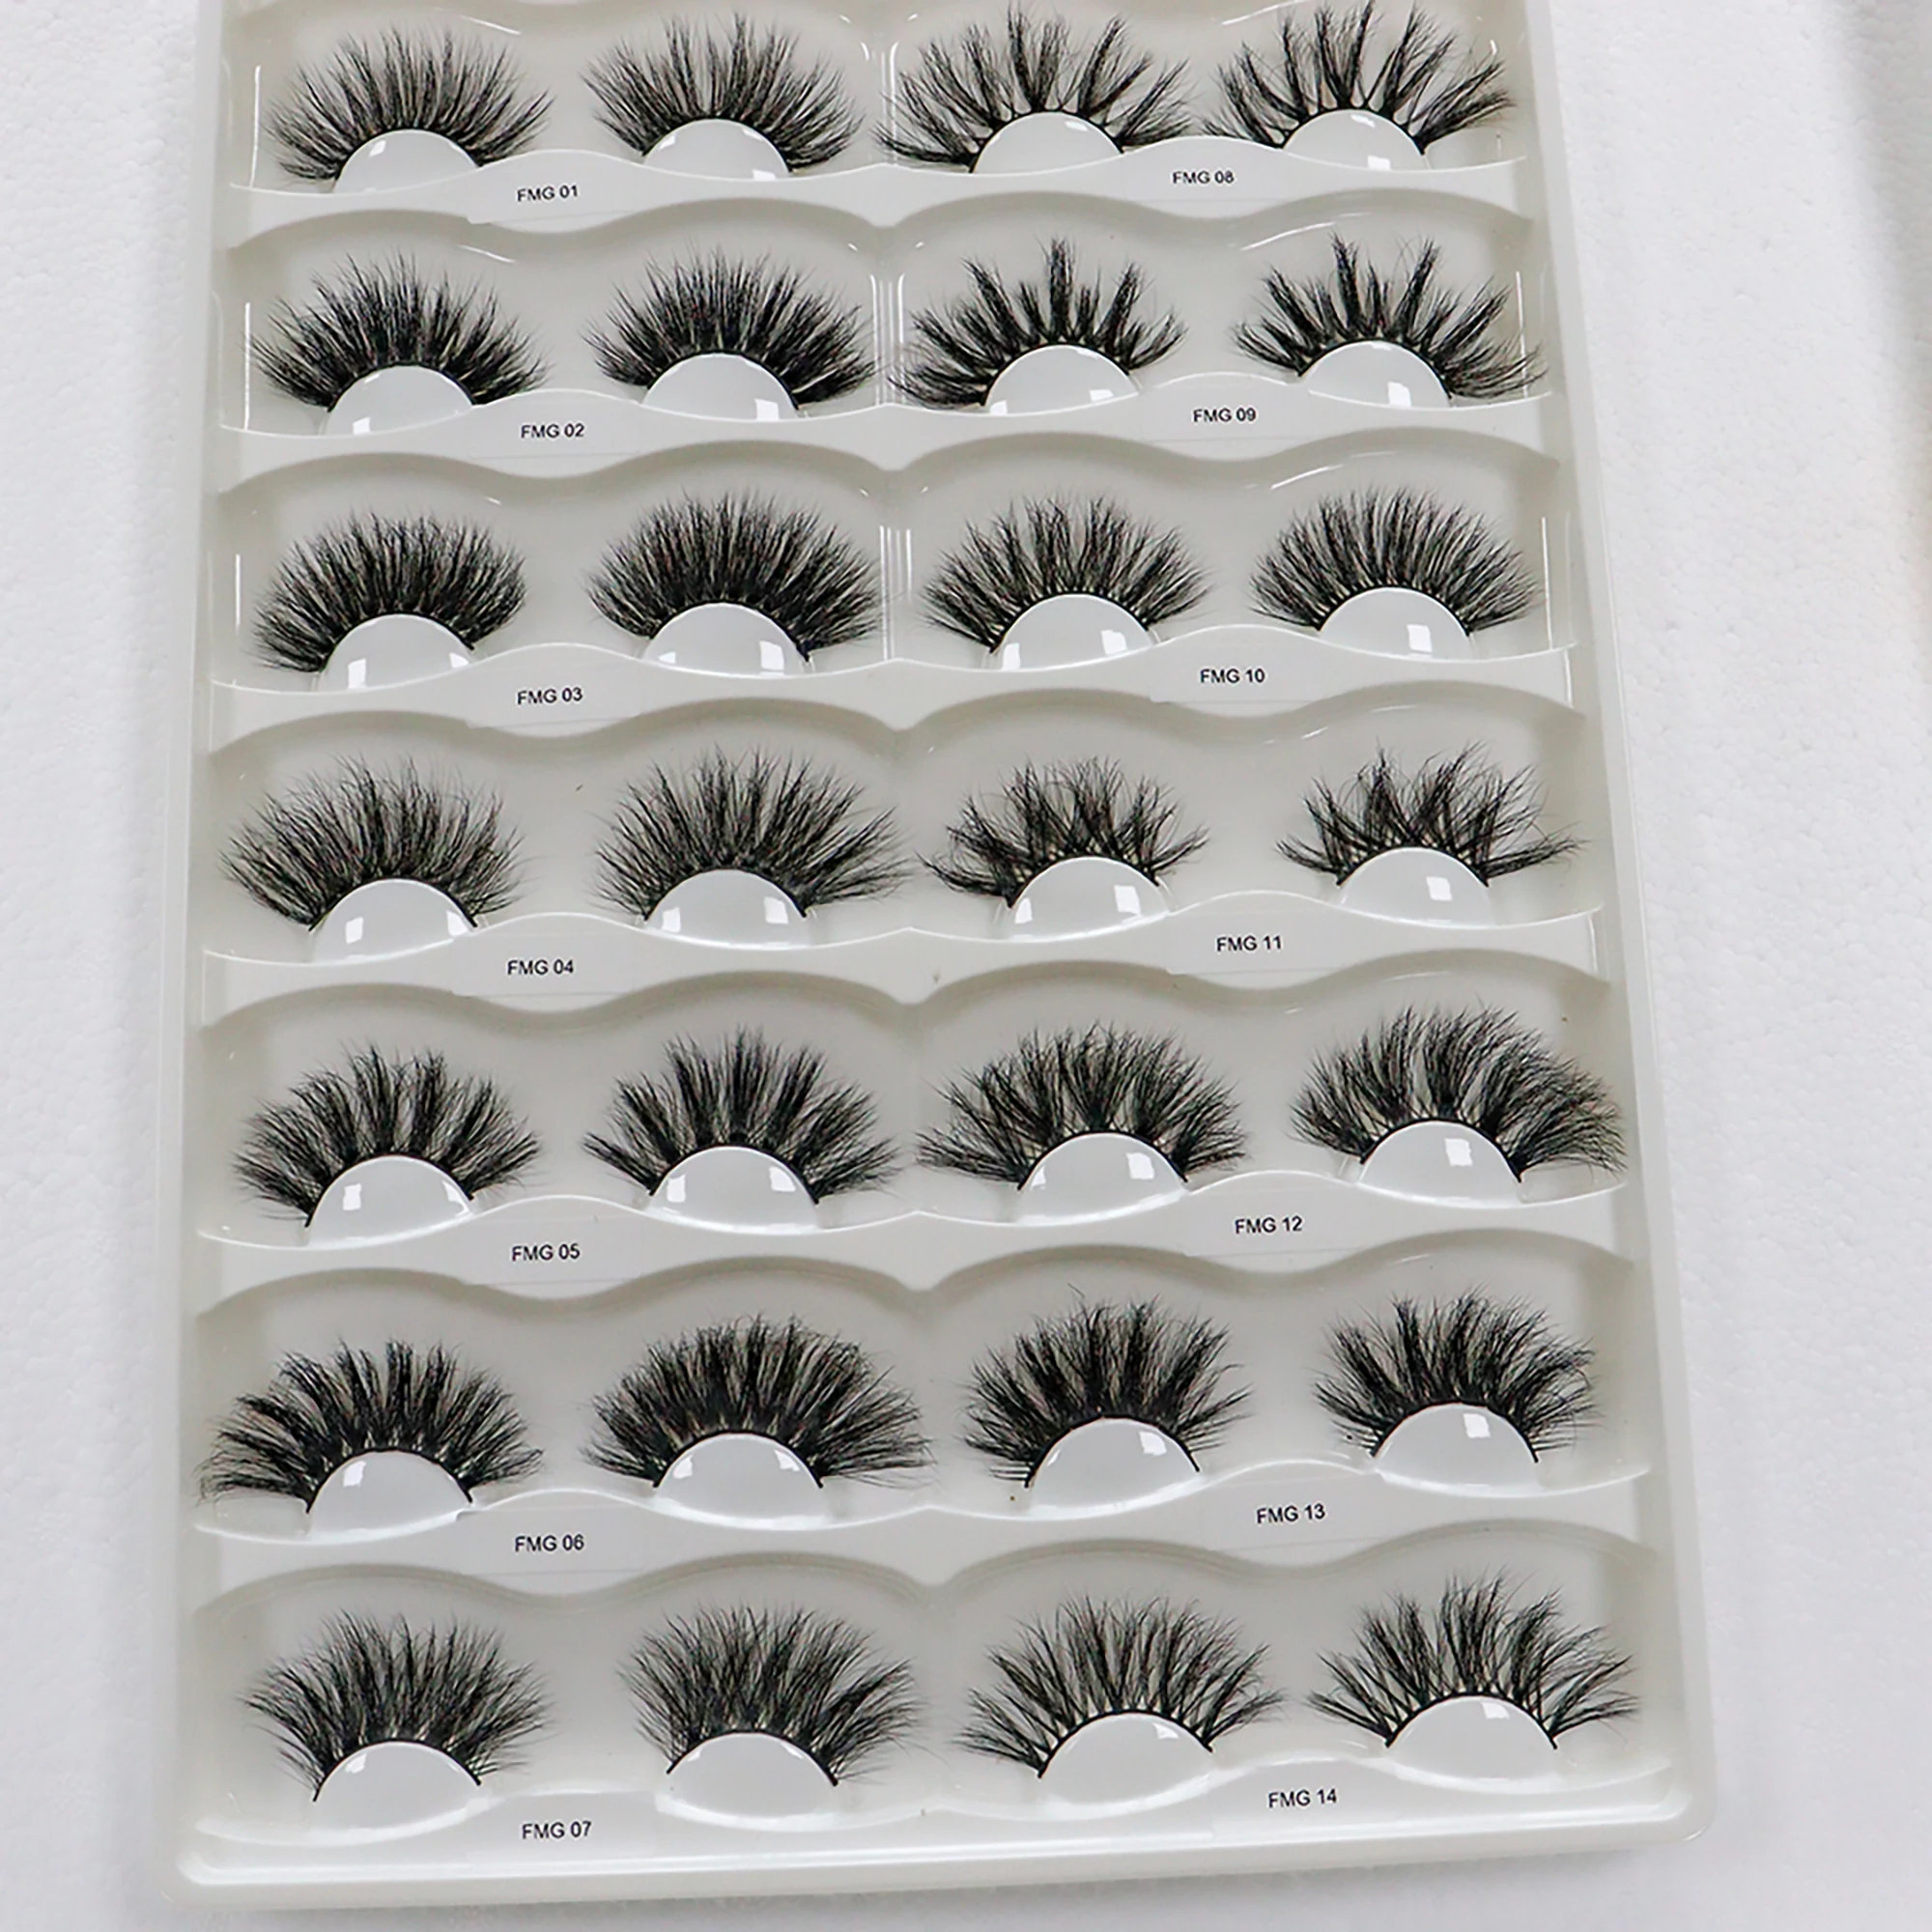 

Cheap Sample Wholesale Faux Mink 25Mm Lashes Cruelty Free 25 Mm Faux Mink Eyelashes Wispy Vegan Strip Cils With Customized Boxes, Natural black